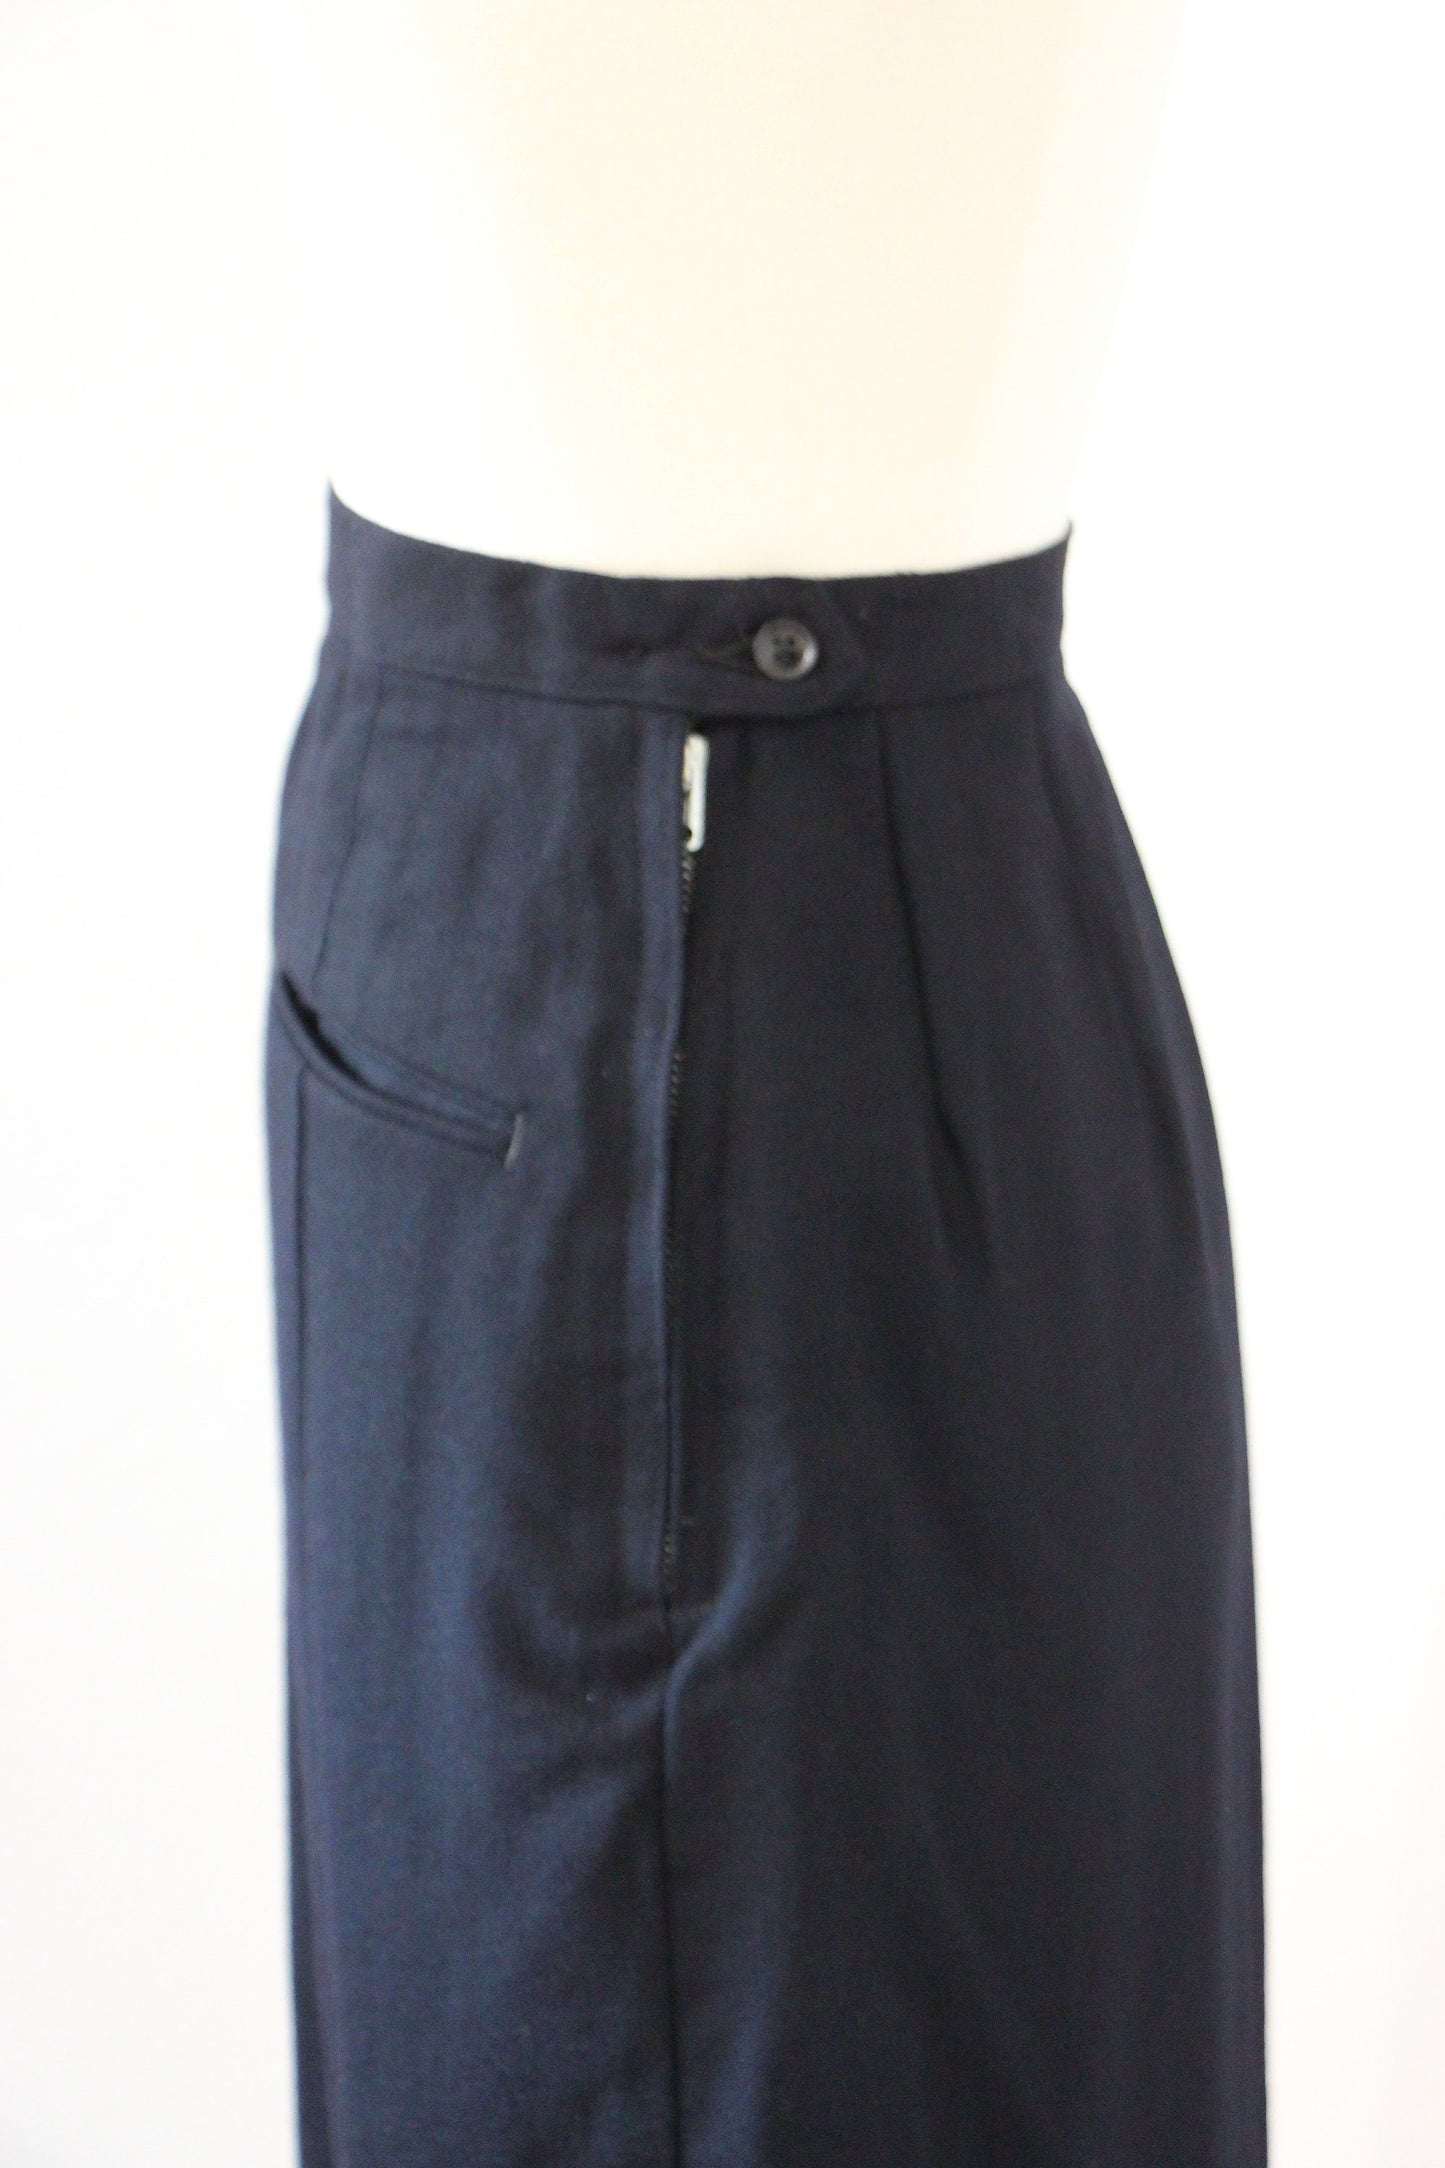 RARE 1950s Vintage British Navy Skirt - Ideal A-line Wool Blue Naval Uniform Skirt Deadstock w Pockets - XS - Choose Your Size